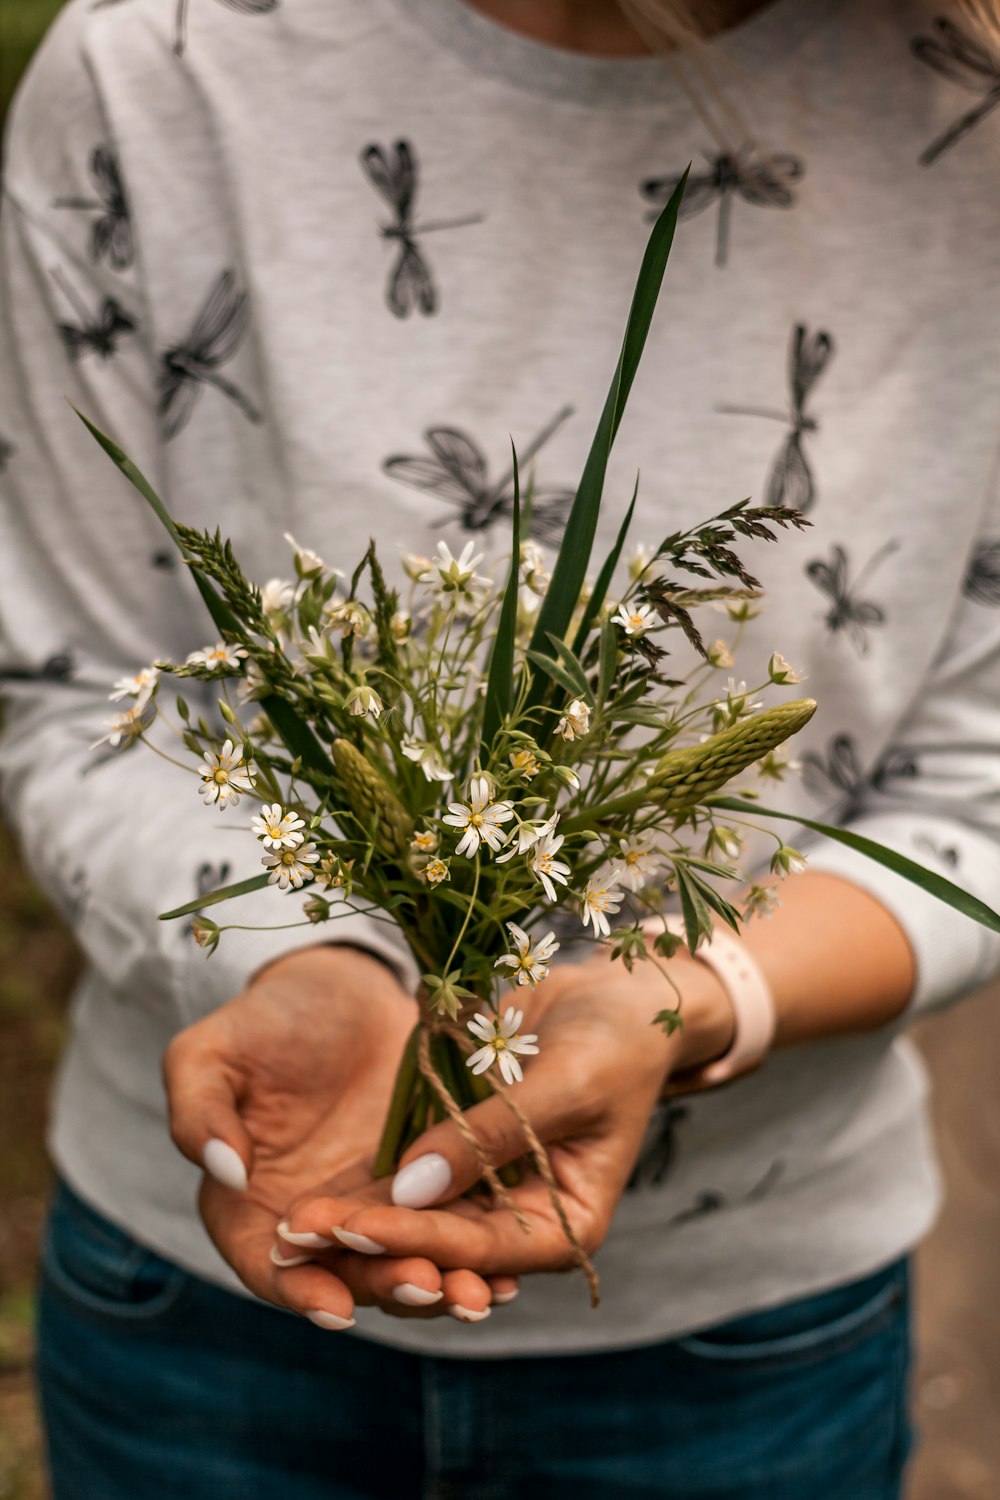 person holding green plant with white flowers